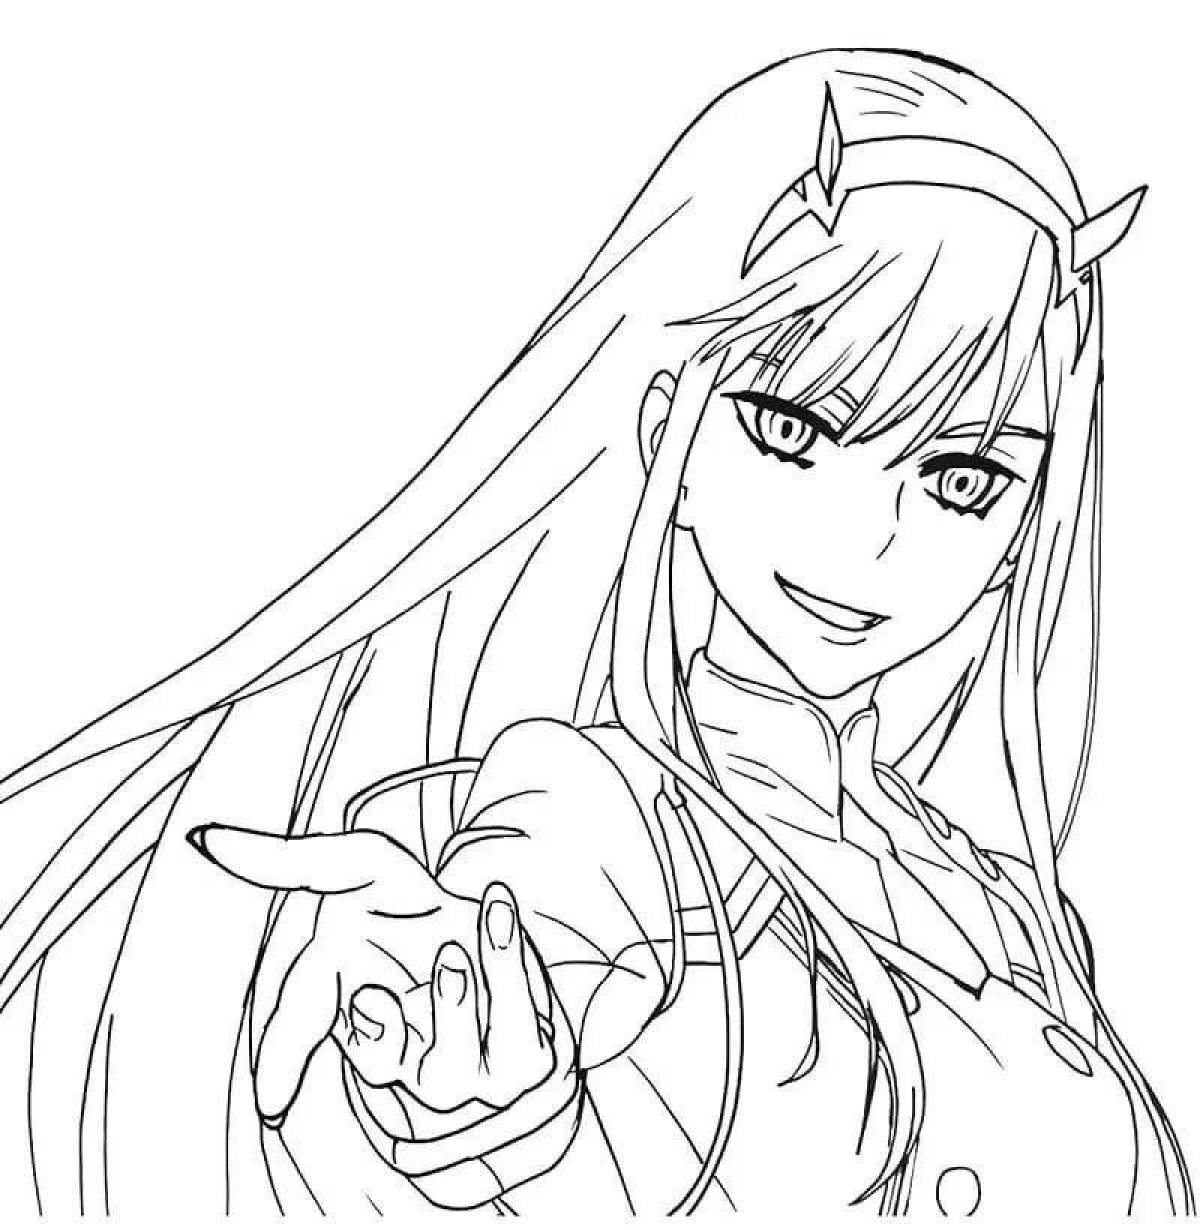 Animated anime coloring page 02